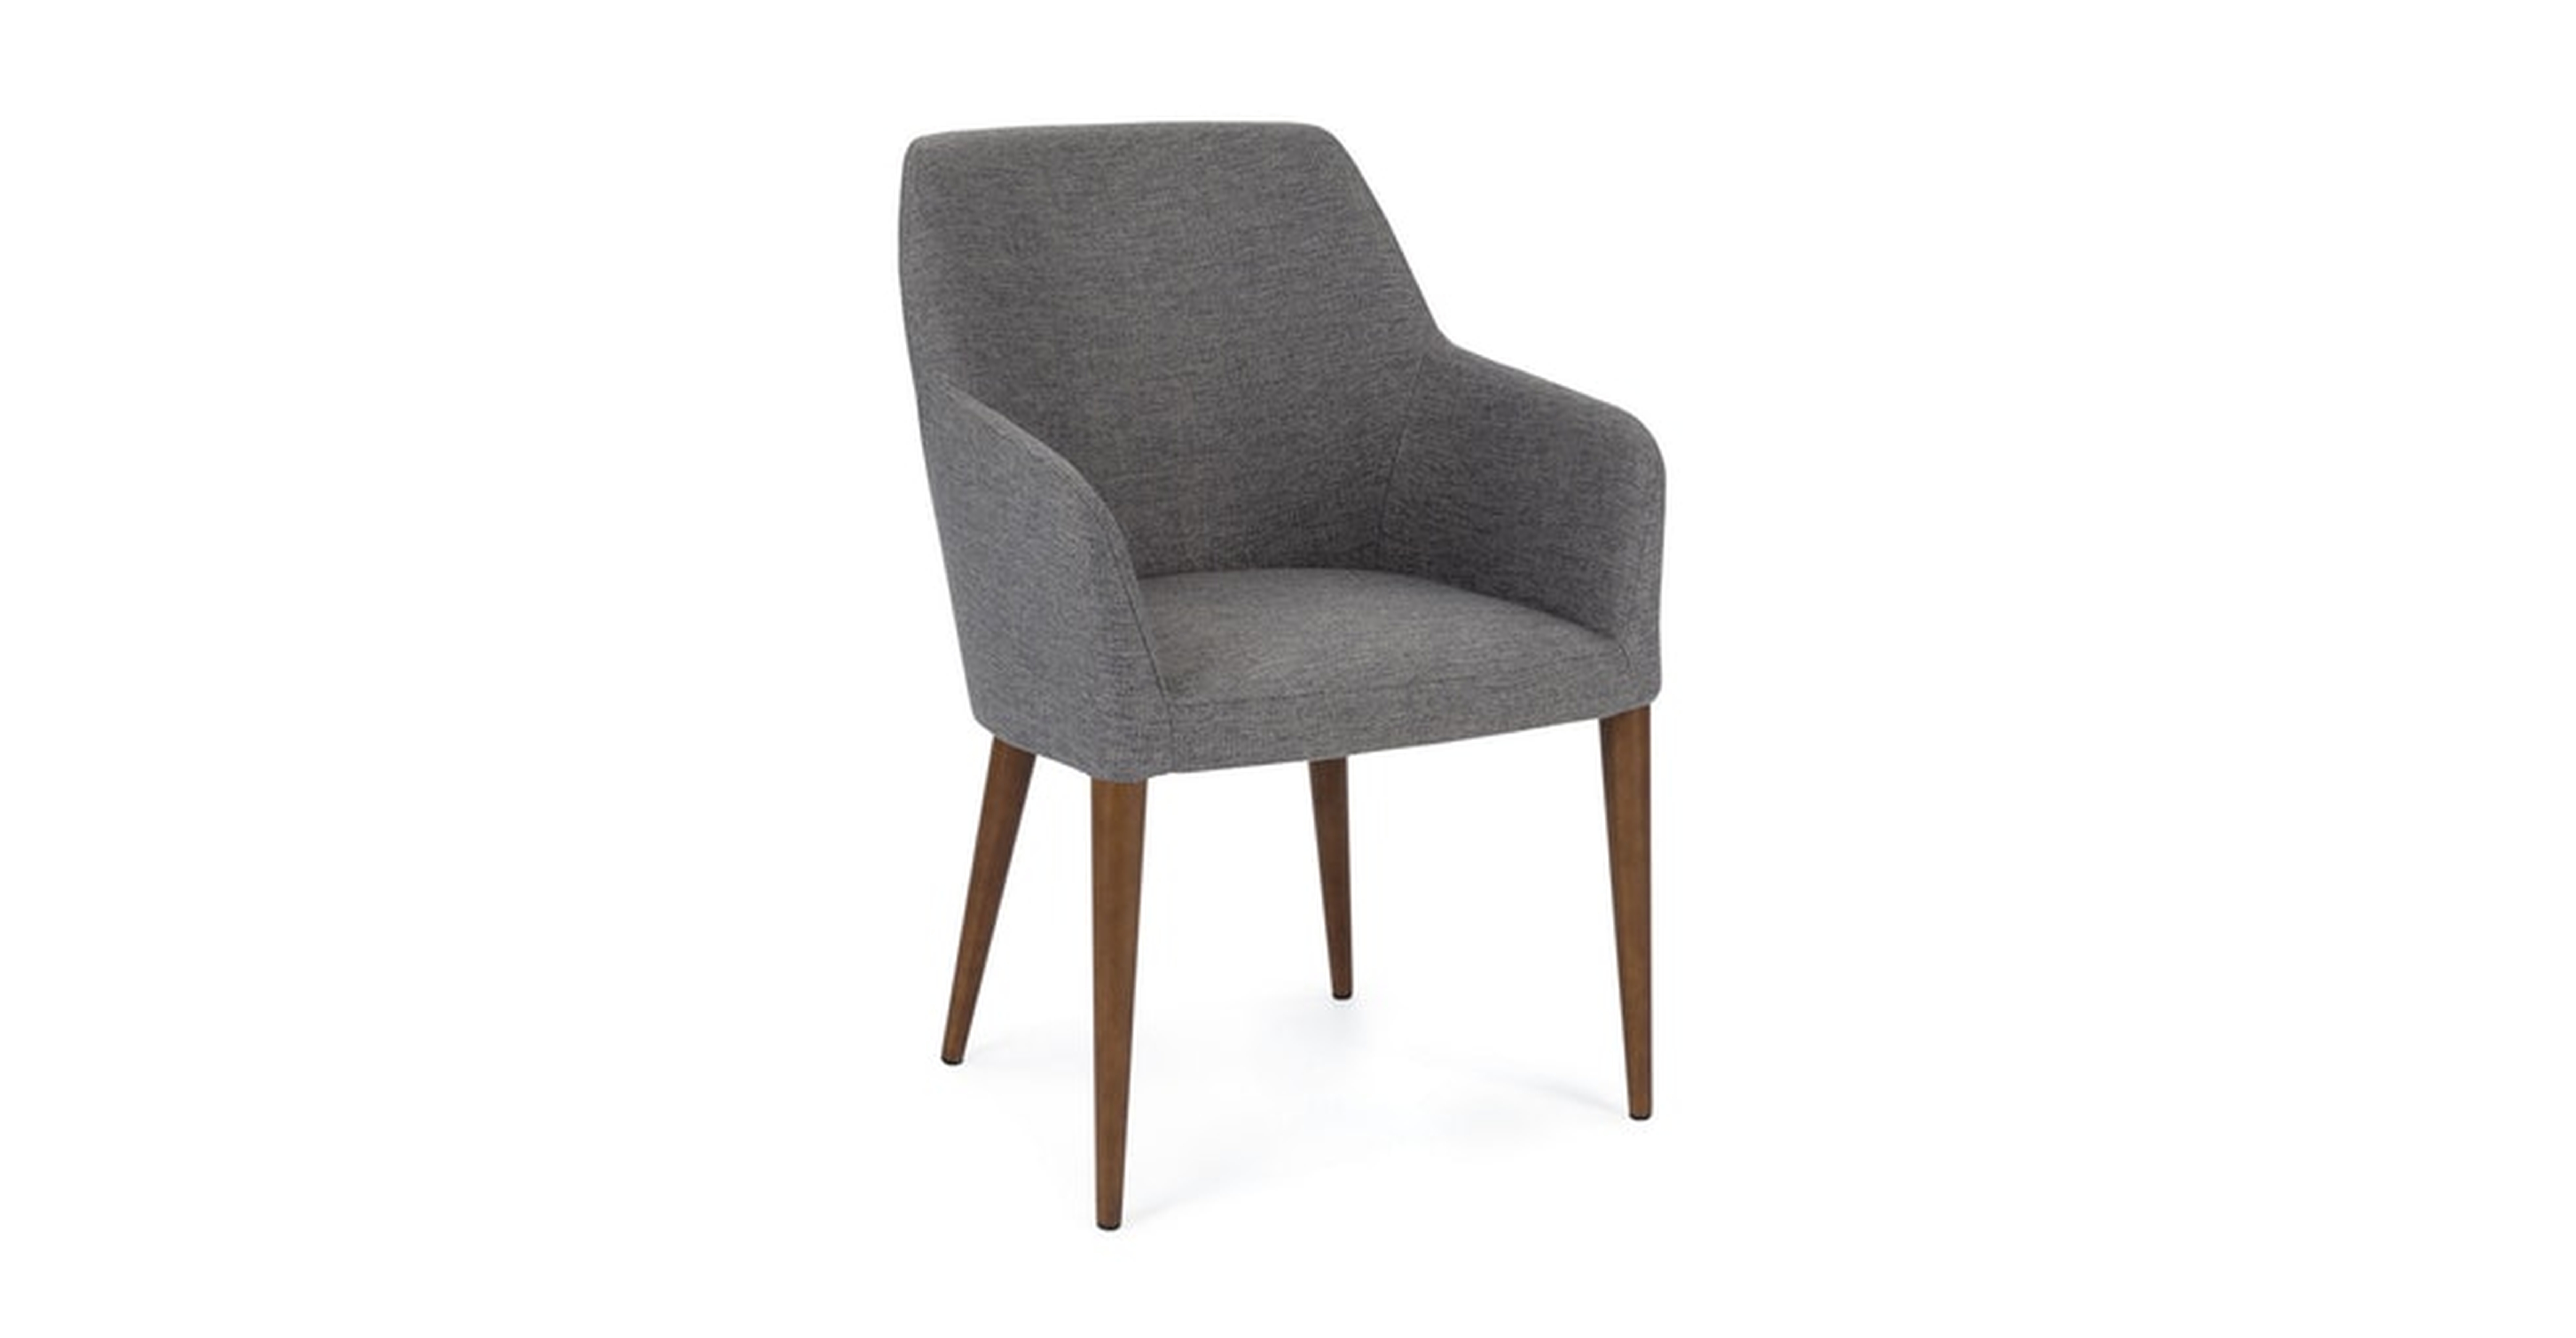 Feast Gravel Gray Dining Chair - Article